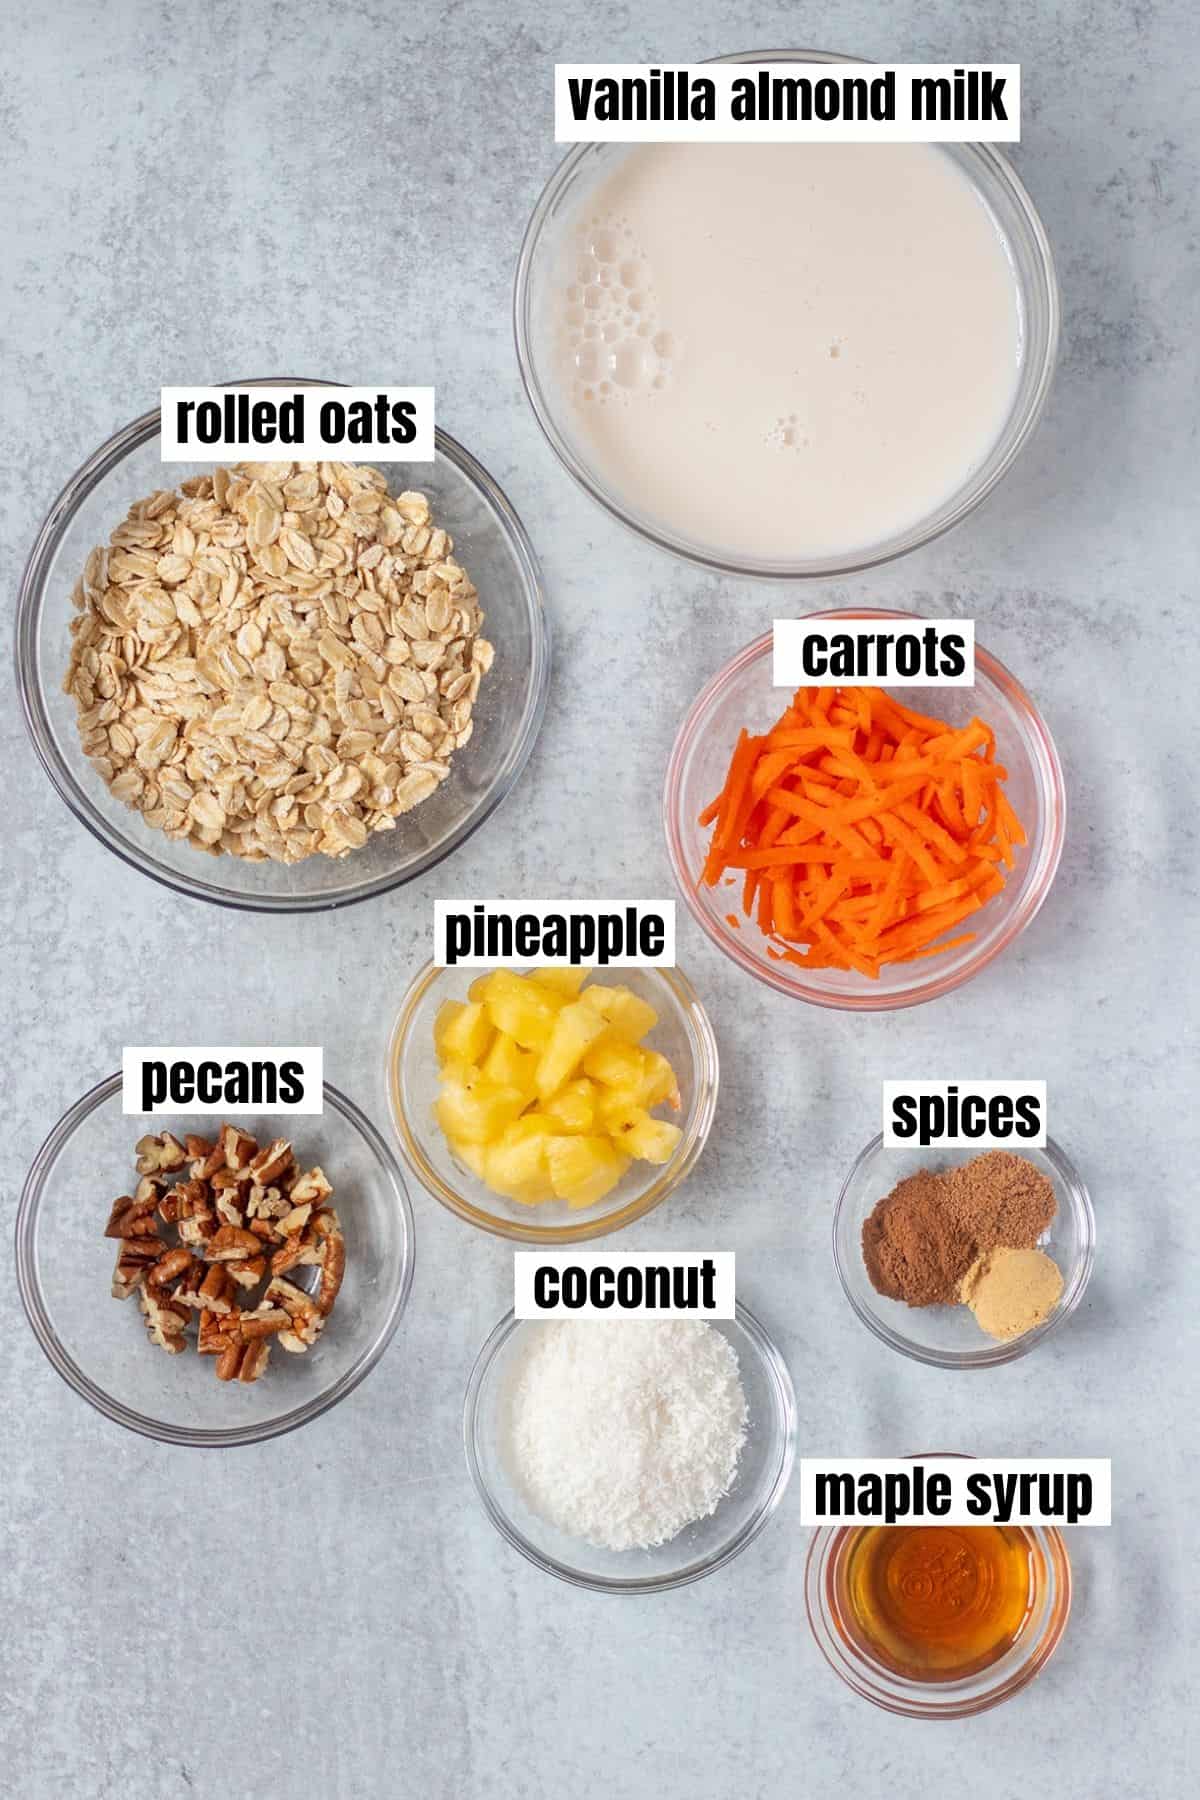 vanilla almond milk, rolled oats, shredded carrots, pineapple, pecans, shredded coconut, spices, maple syrup